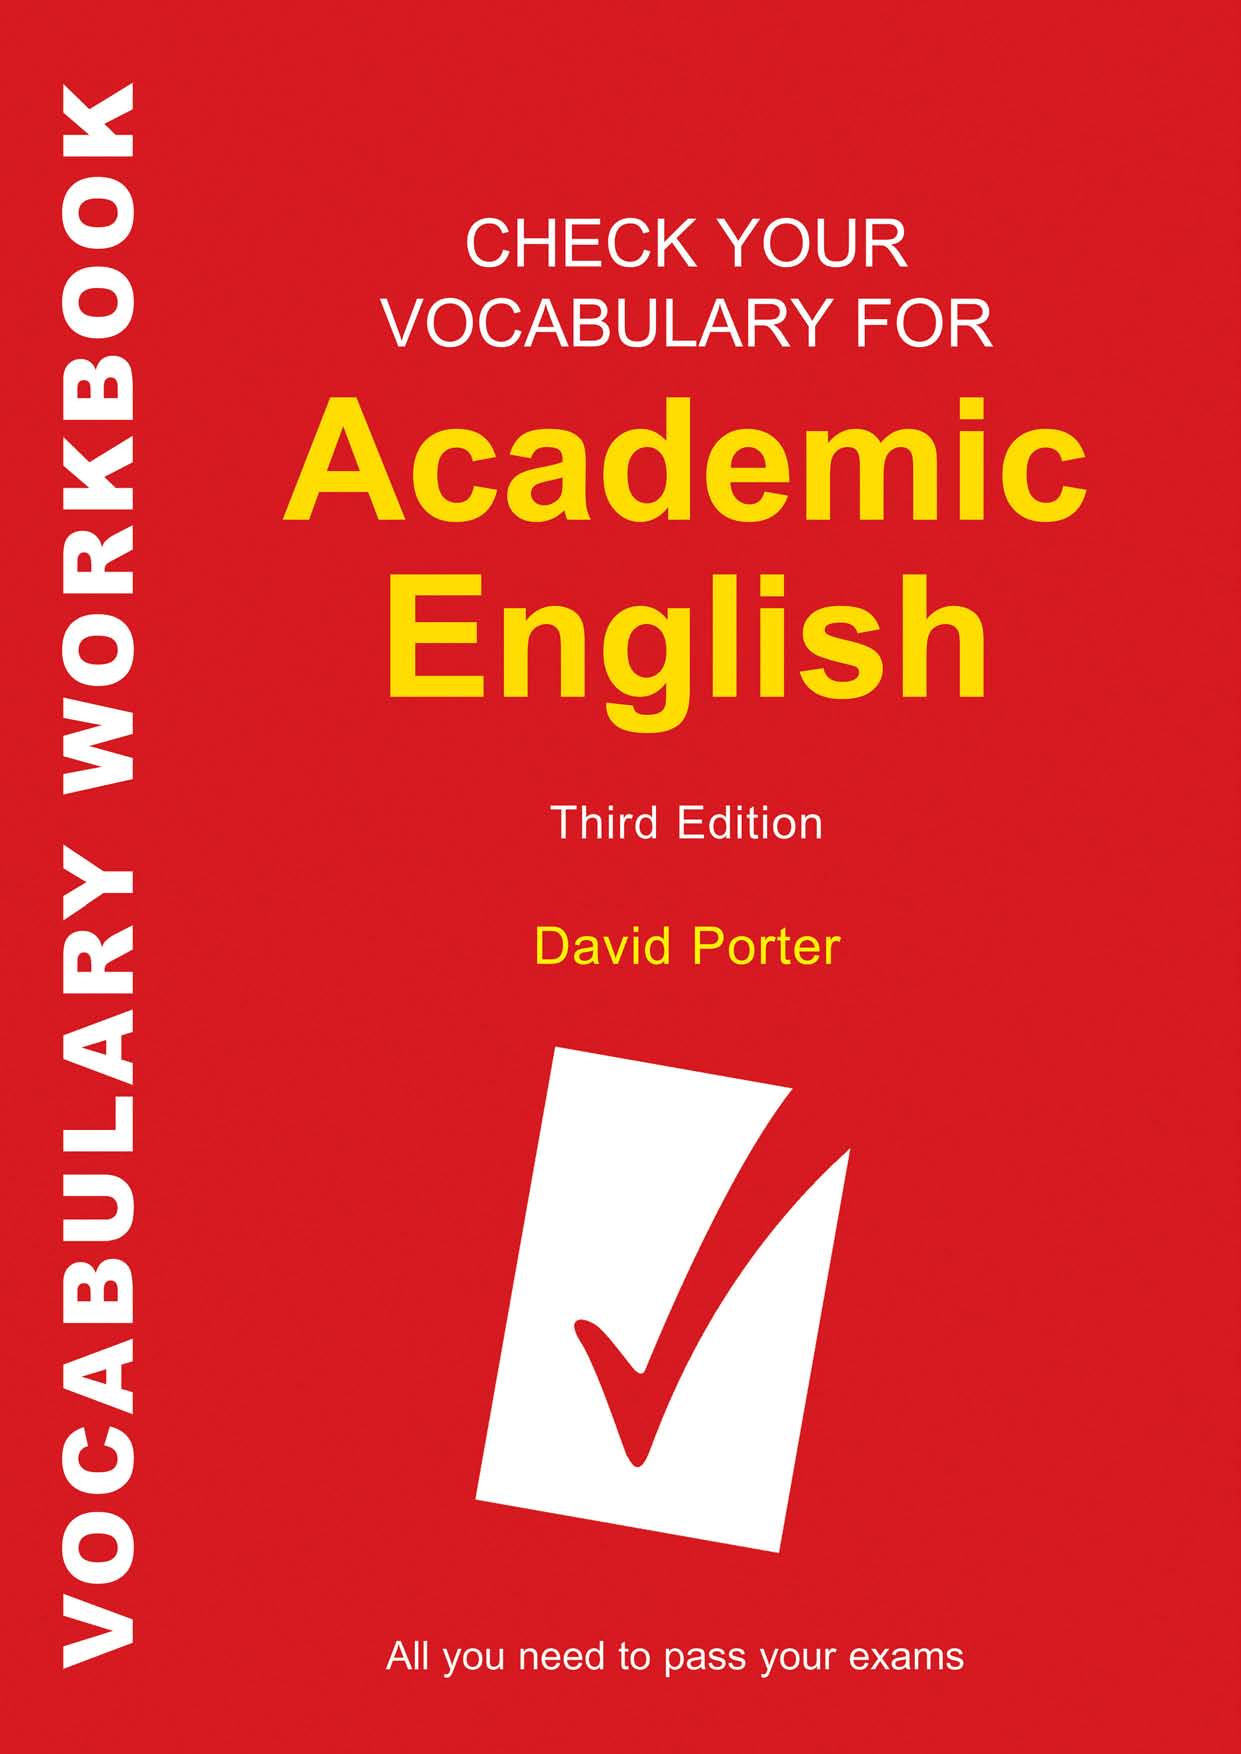 Check Your Vocabulary for Academic English by David Porter